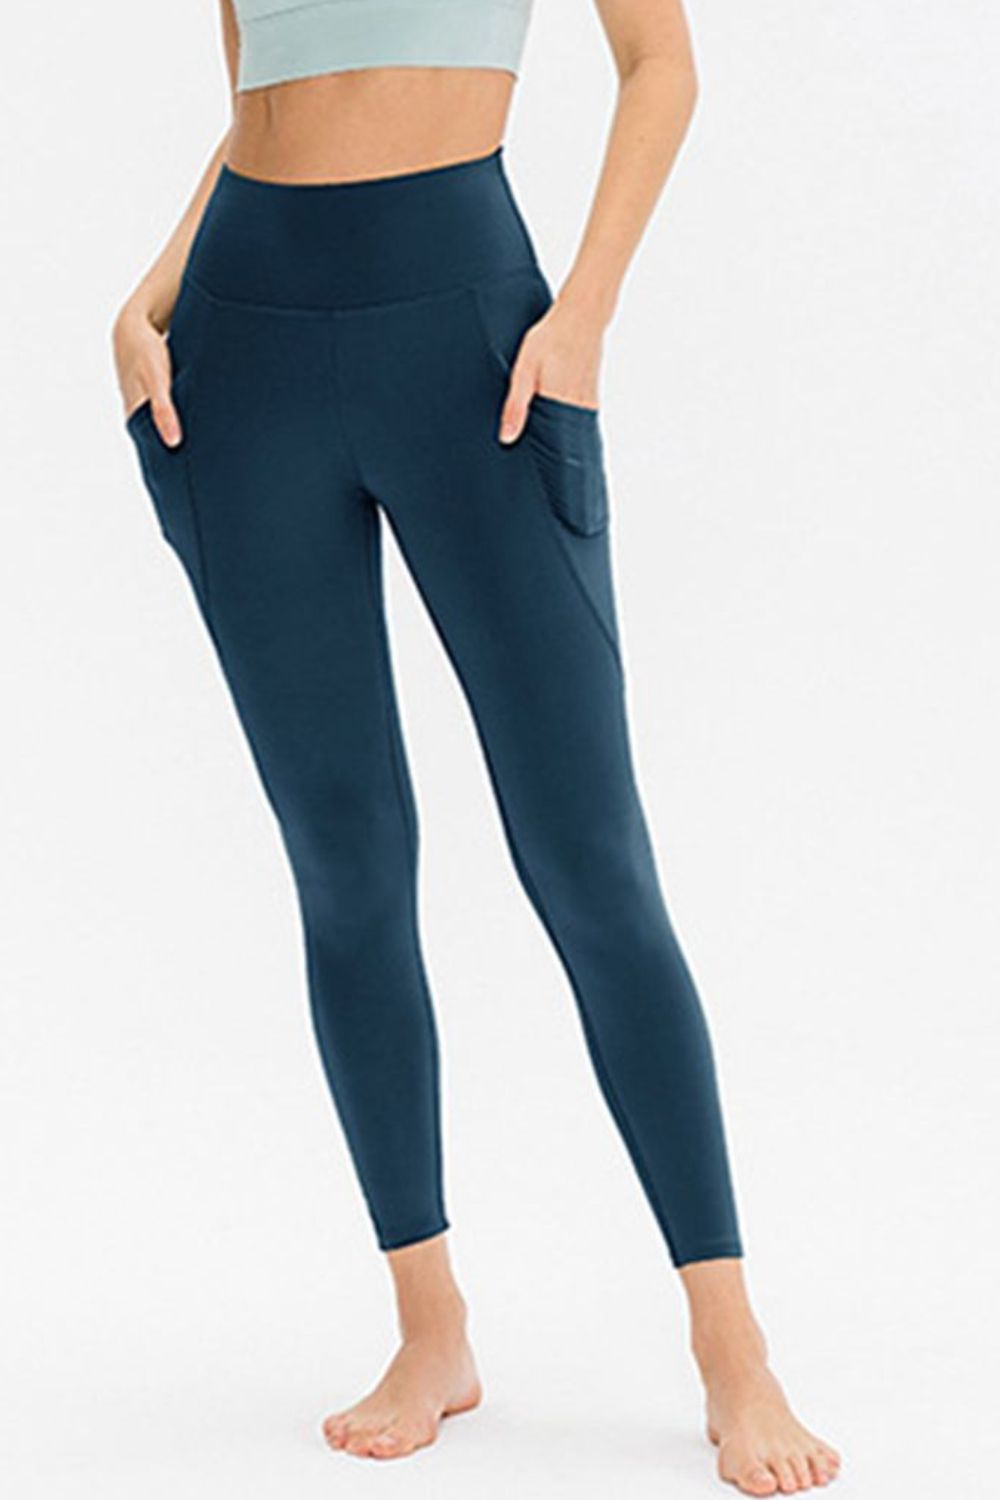 Slim Fit Long Active Leggings with Pockets - Deep Teal / S Wynter 4 All Seasons